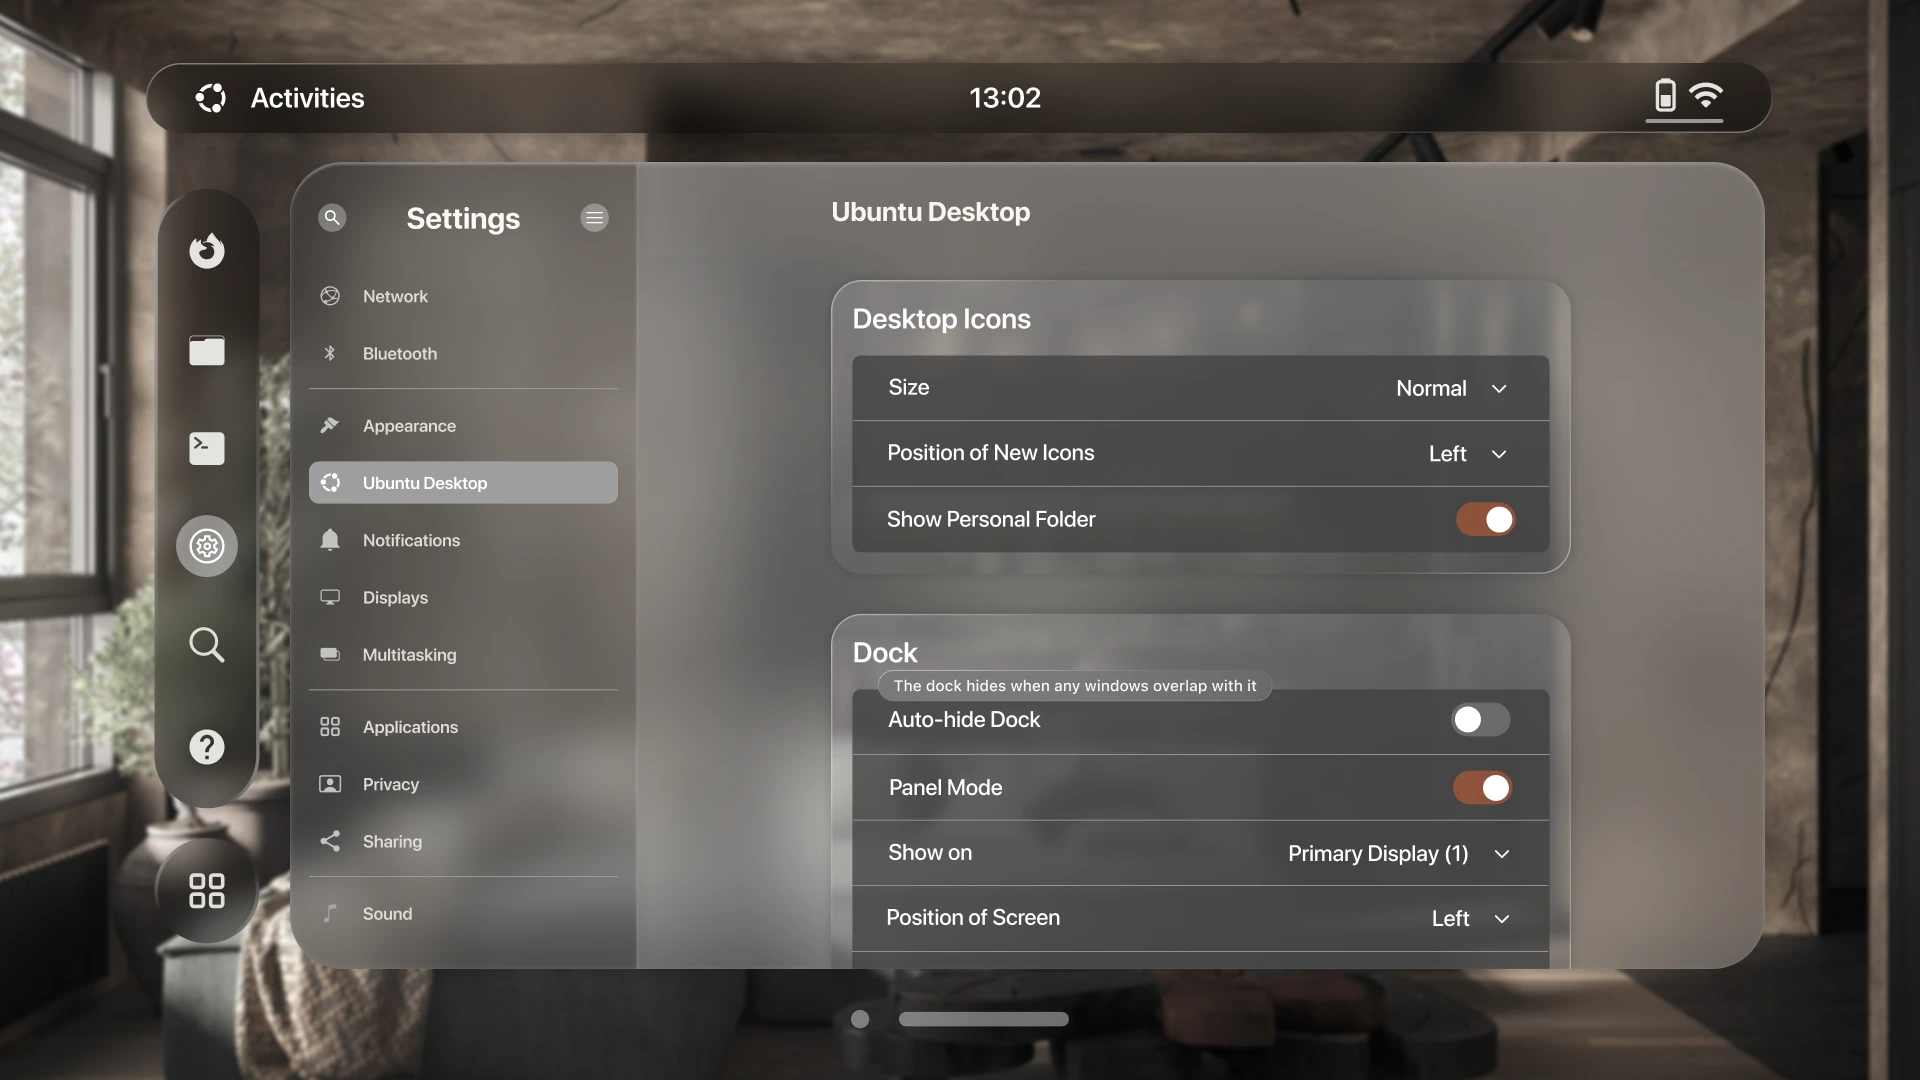 Settings with Tooltip final design